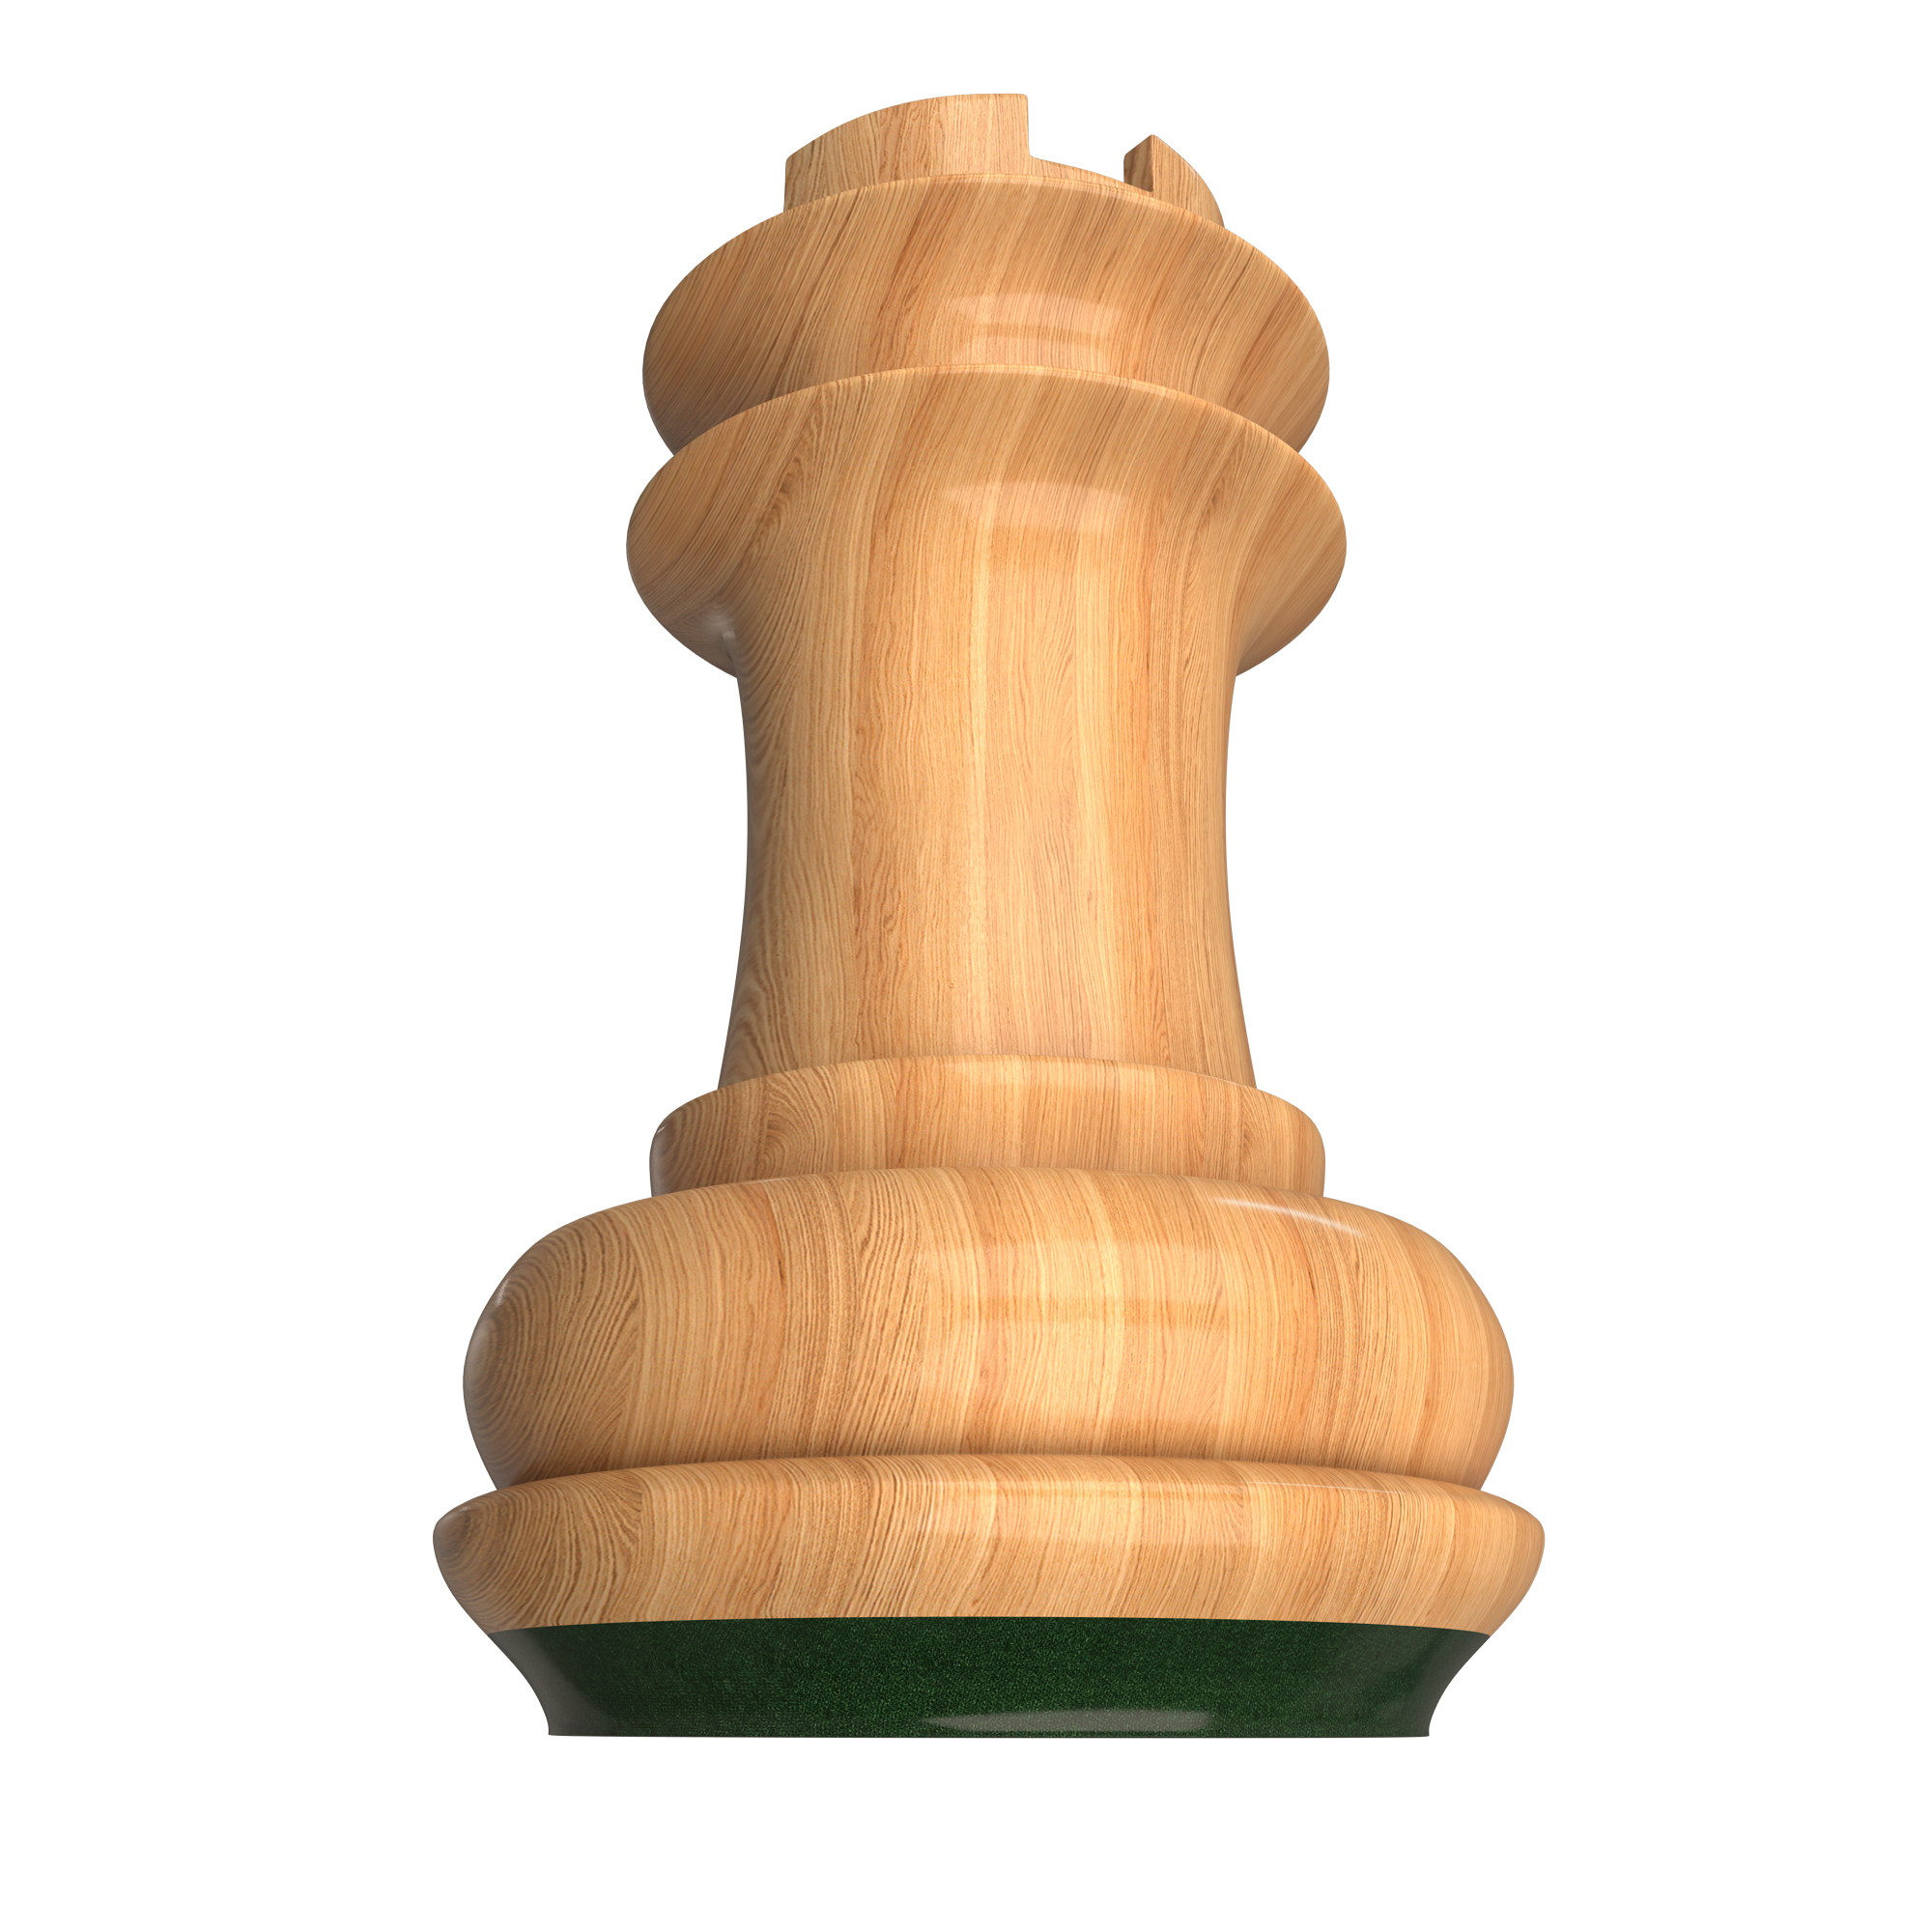 Rook Chess Piece #1 Wood Print by Ktsdesign - Science Photo Gallery